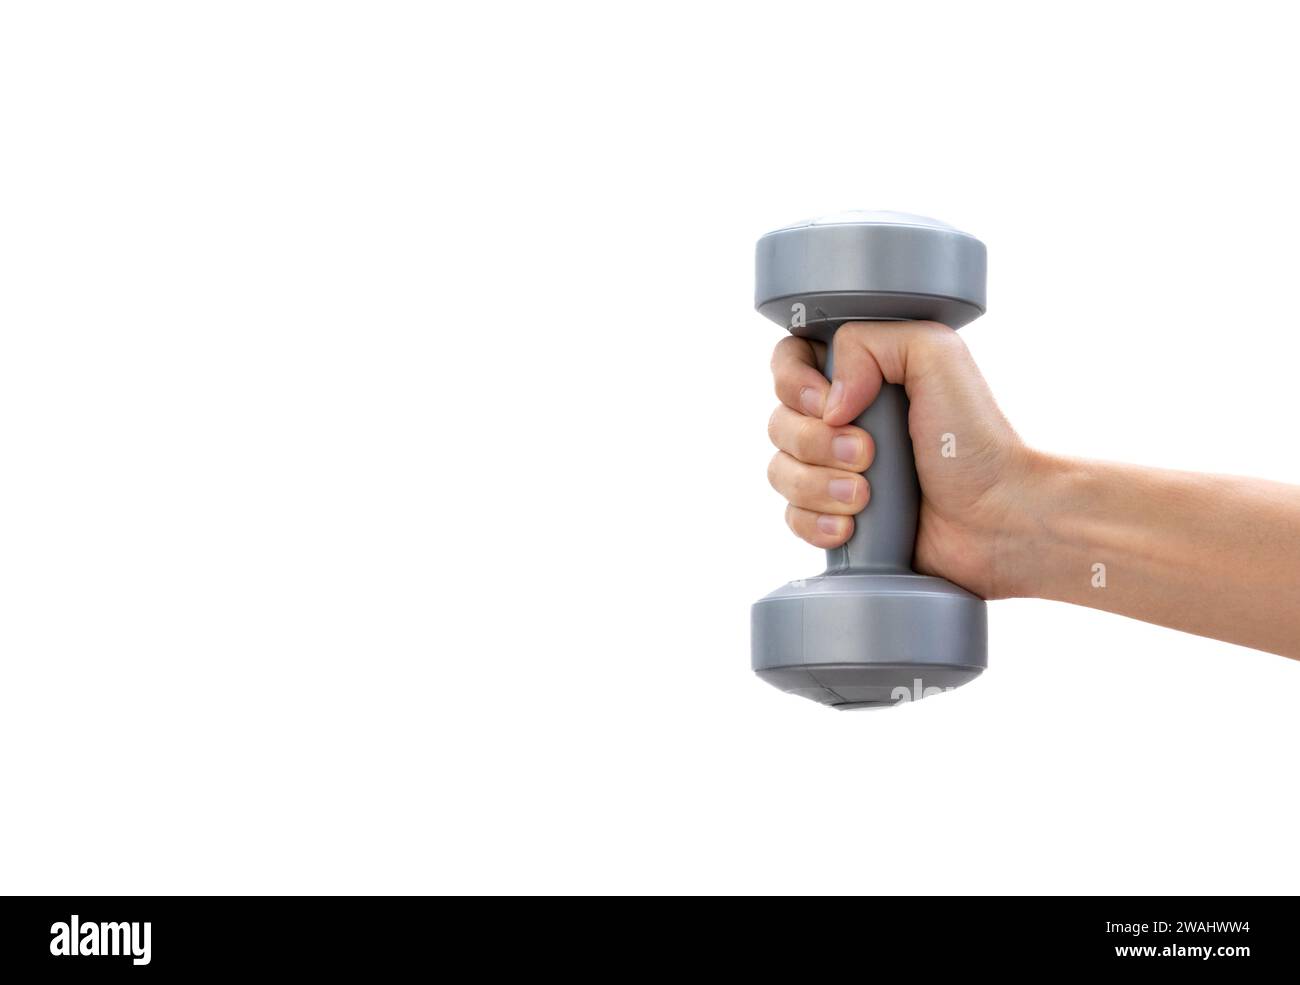 Concept for healthy lifestyle and imrpovement. Skinny young man holding a plastic dumbbell. After some edits. Stock Photo